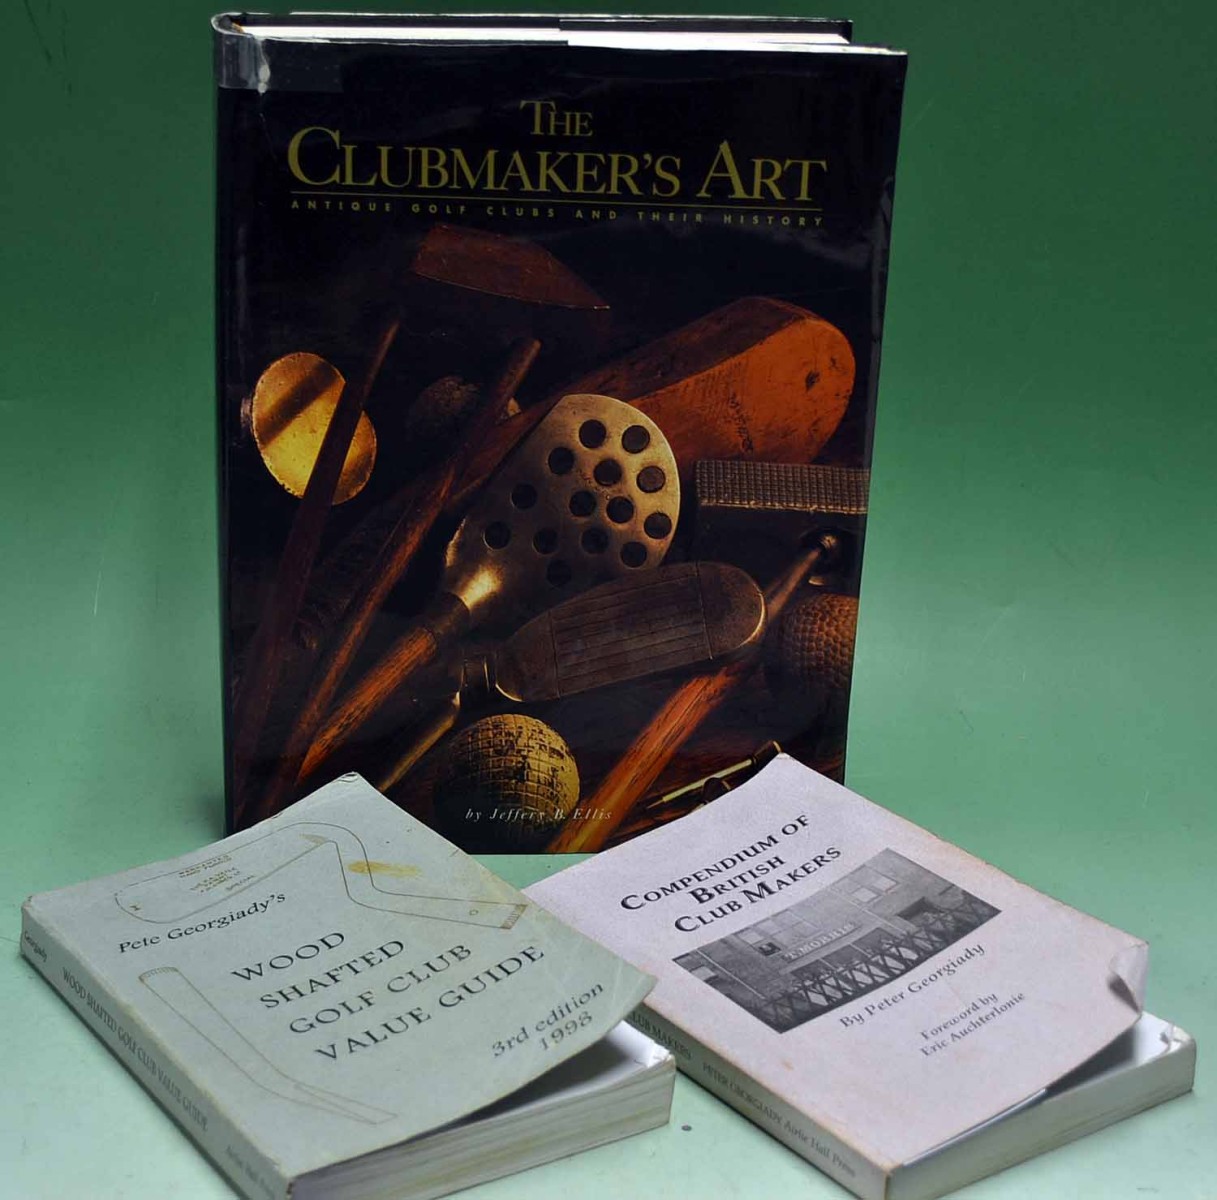 Ellis, Jeffery â€“ "The Club Maker`s Art â€“ Antique Golf Clubs and Their History" 1st edition